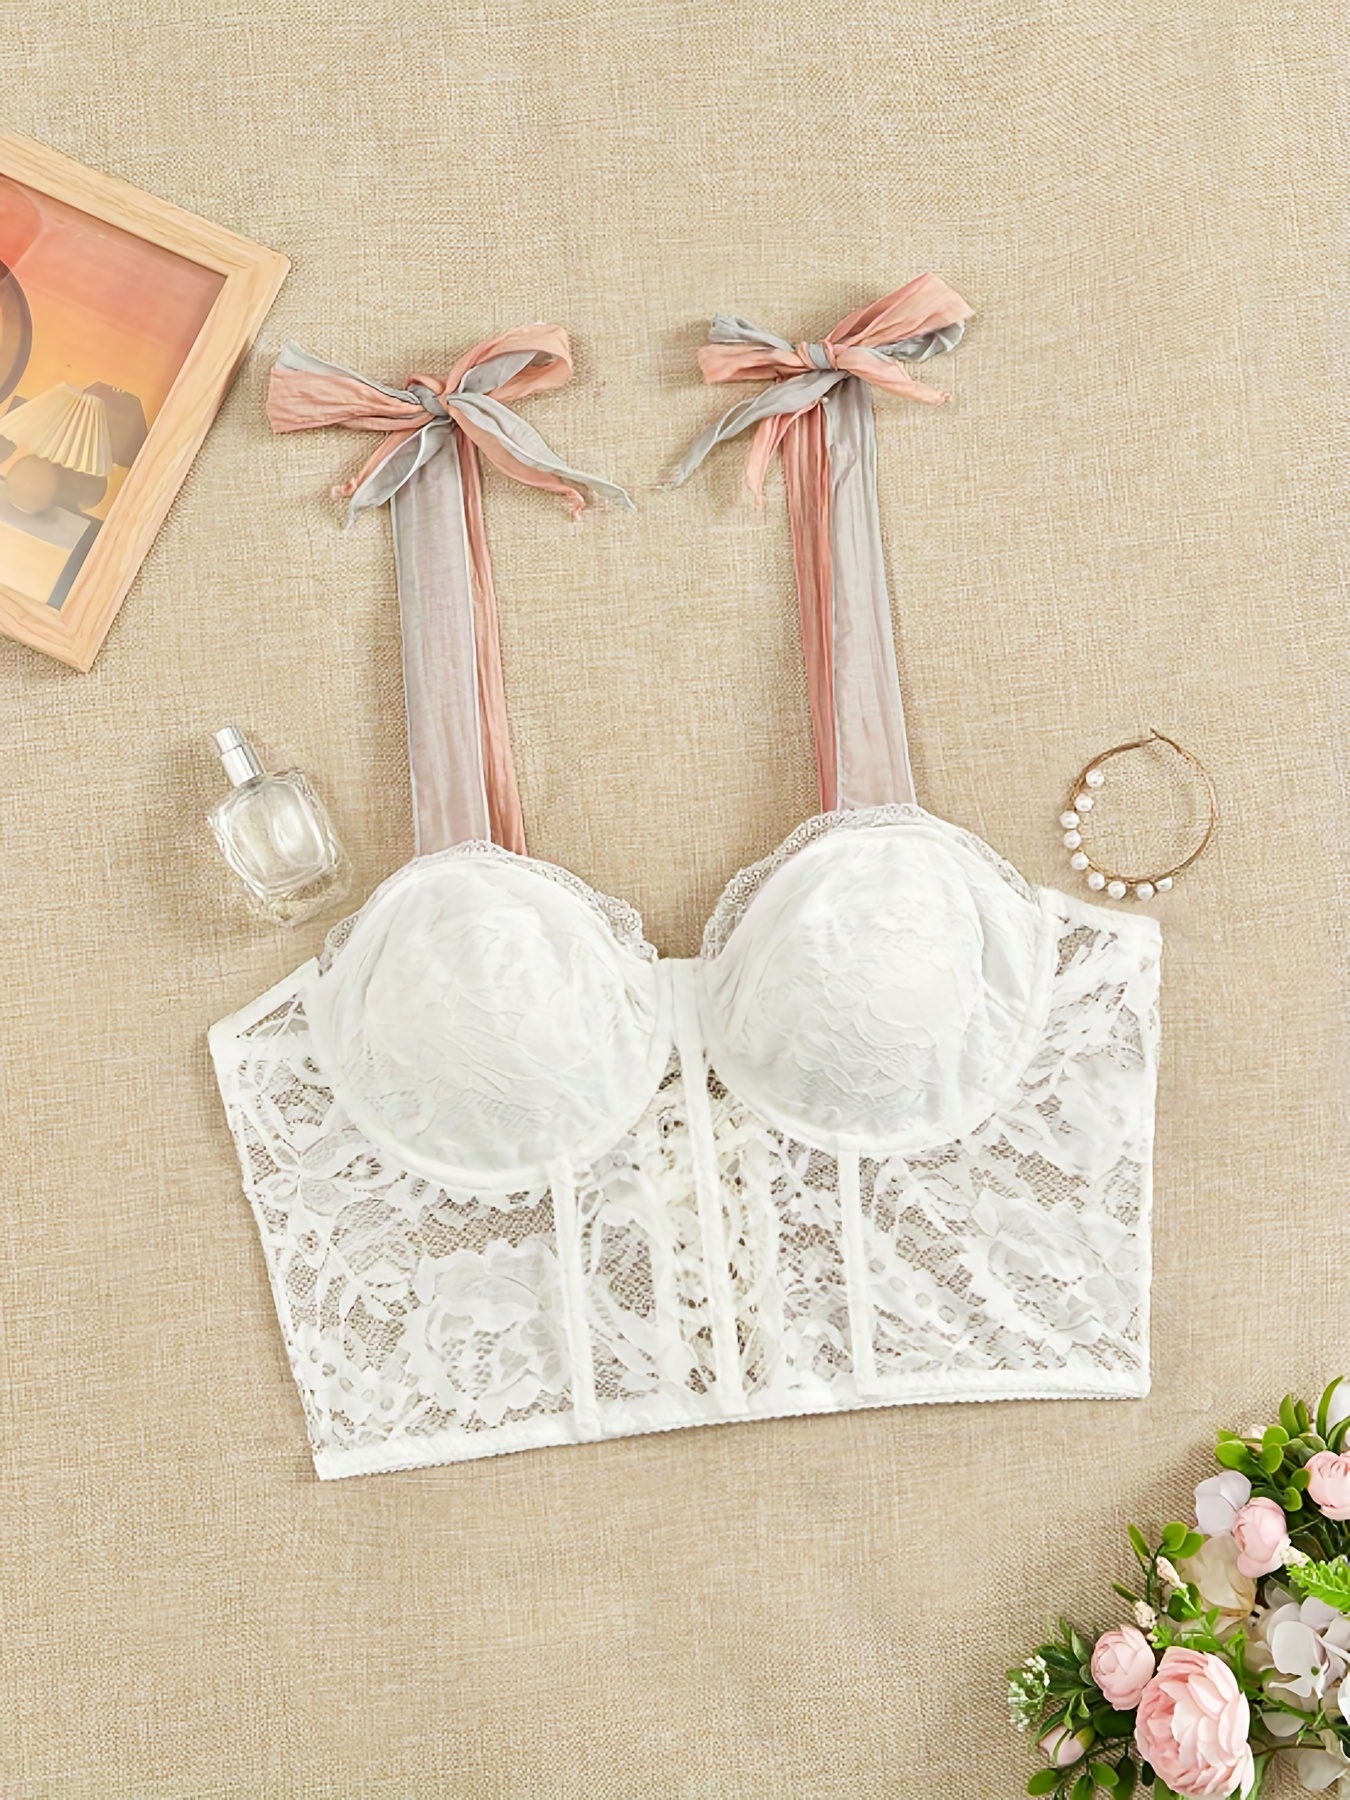 Sun-imperial - ultra thin sexy floral lace bras for women